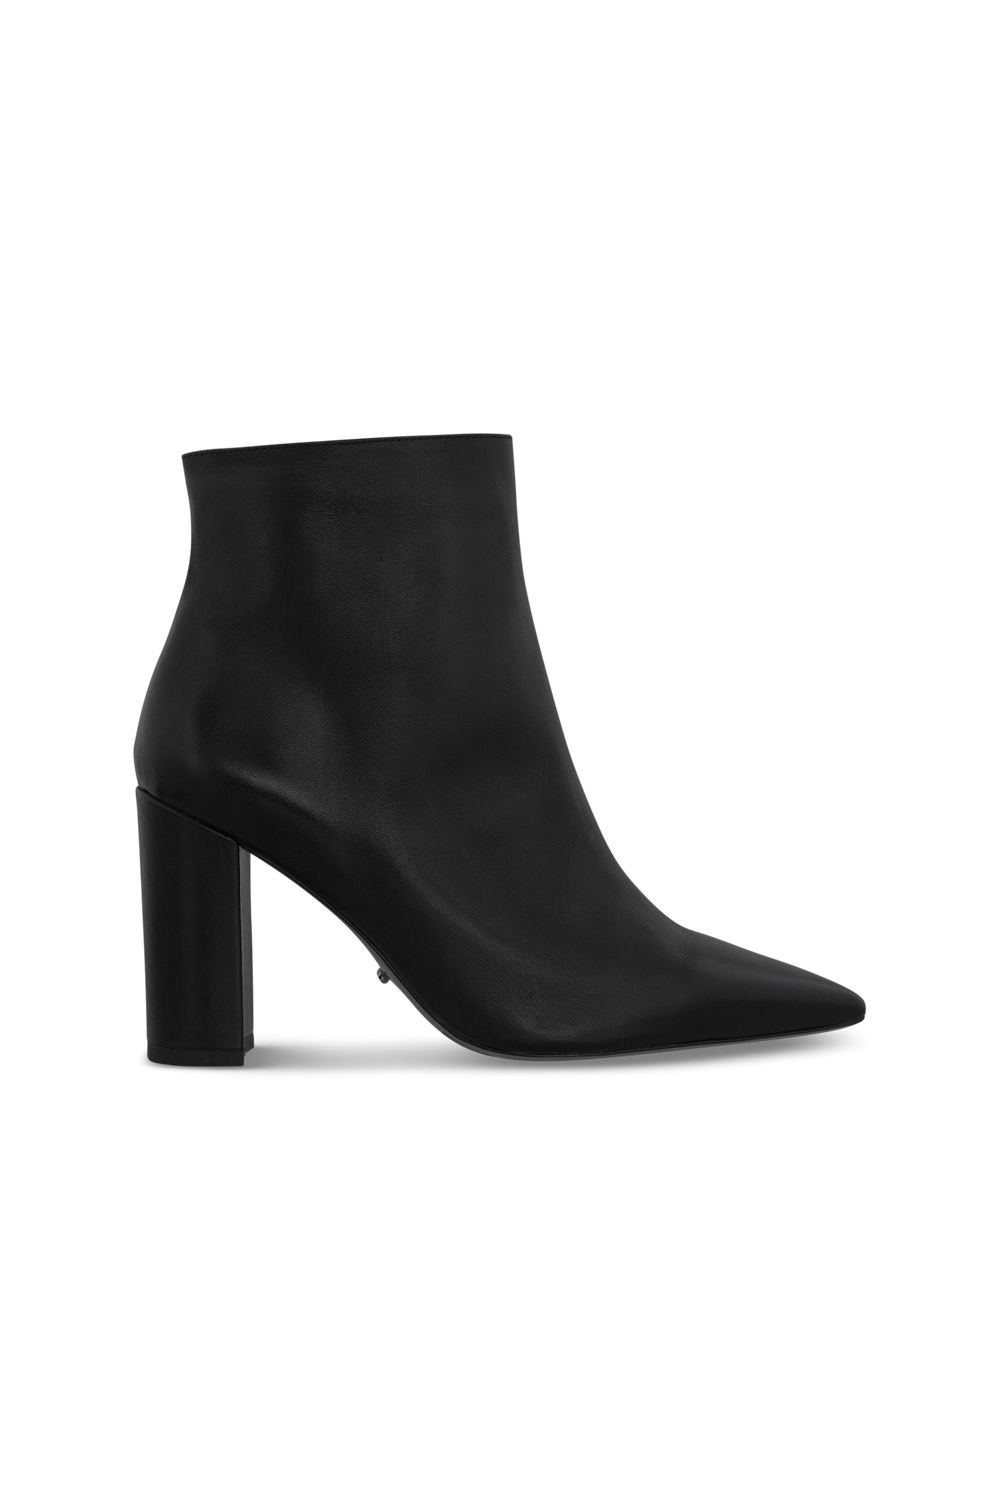 Black Tony Bianco Emaly 8.5cm Women's Ankle Boots | 0935-ZLHUF